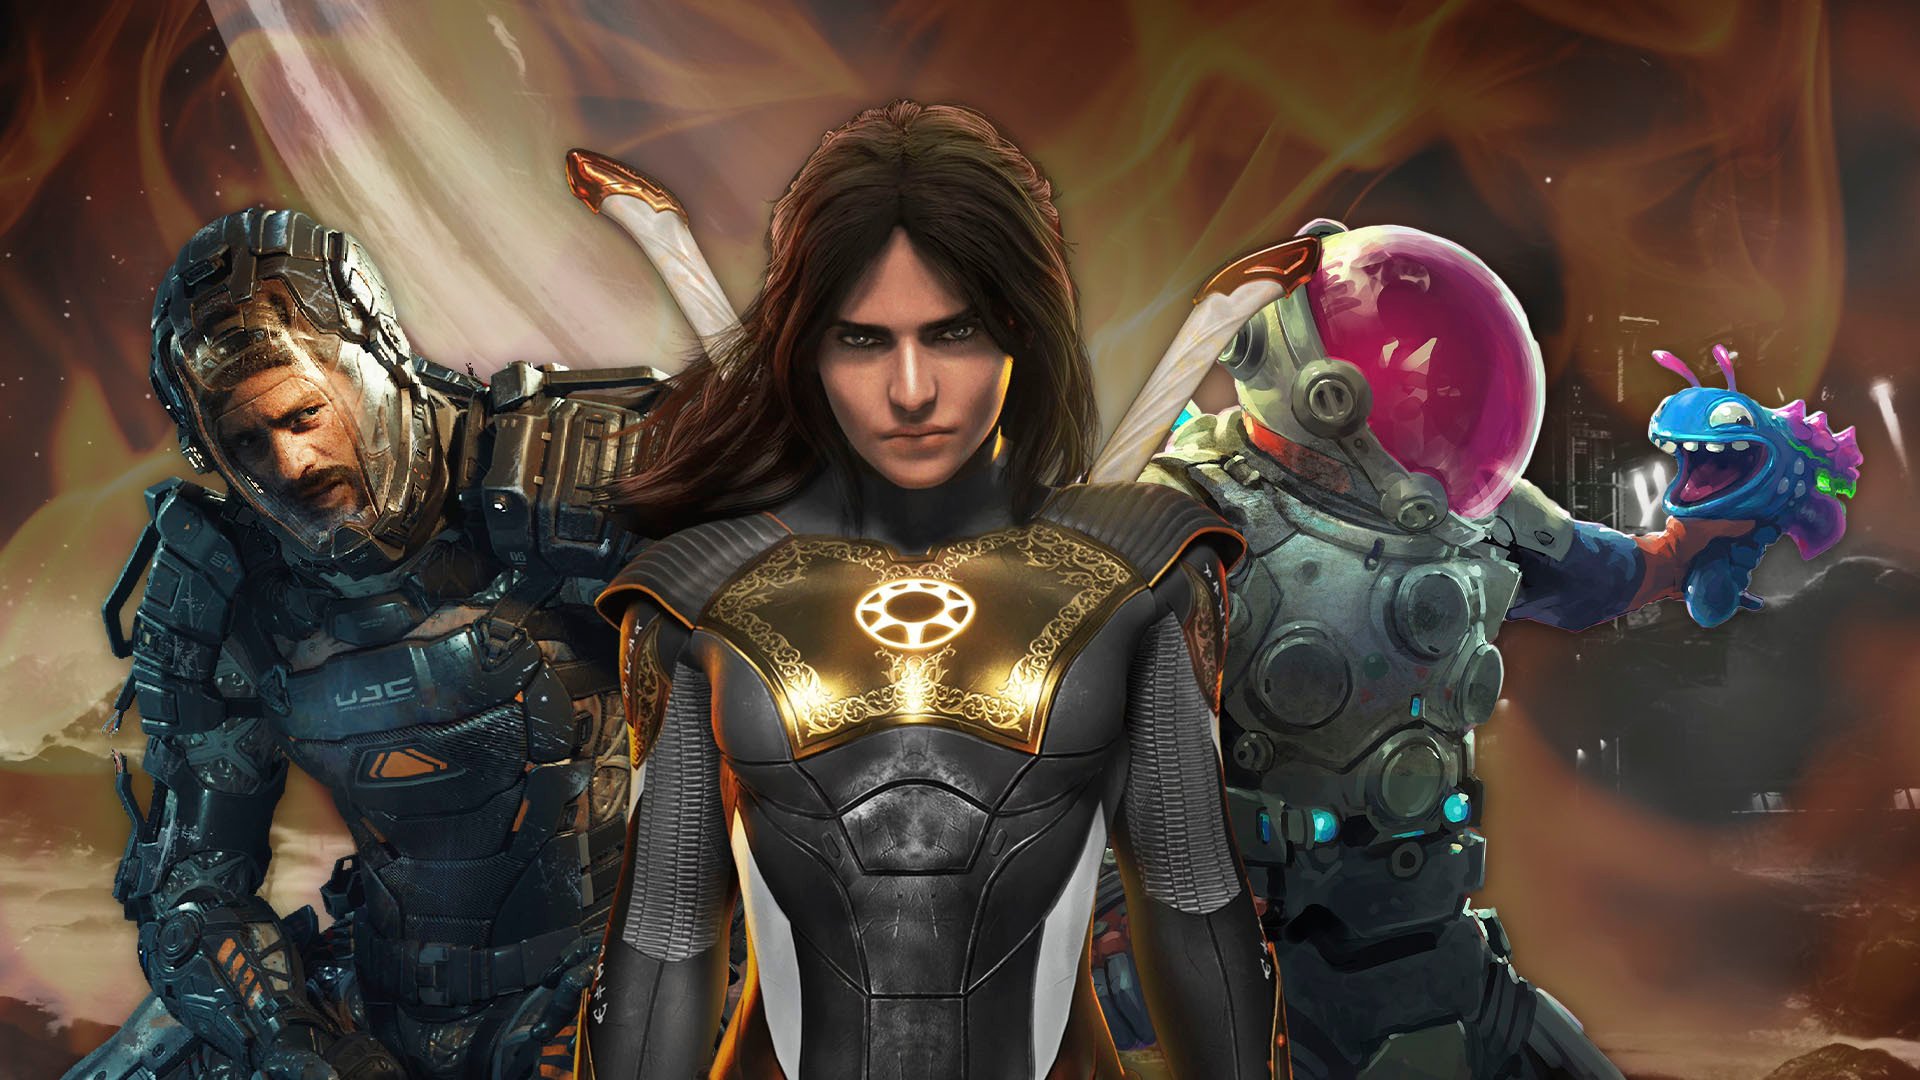 Check out the strategic action of Marvel's Midnight Suns – Destructoid